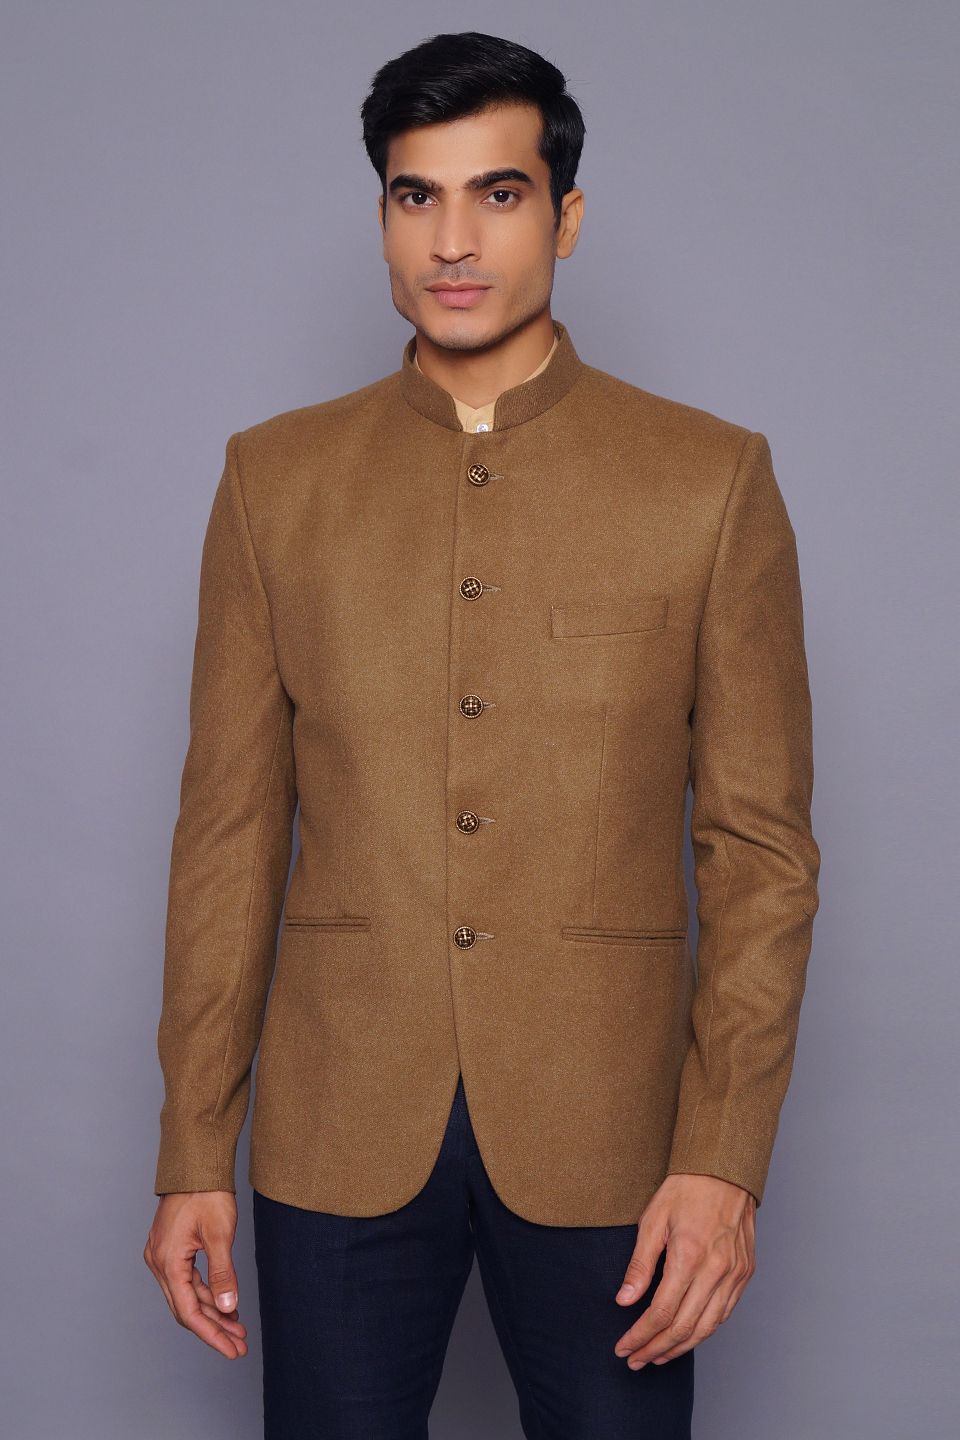 Wintage Men's Wool Casual and Festive Bandhgala Blazer : Brown